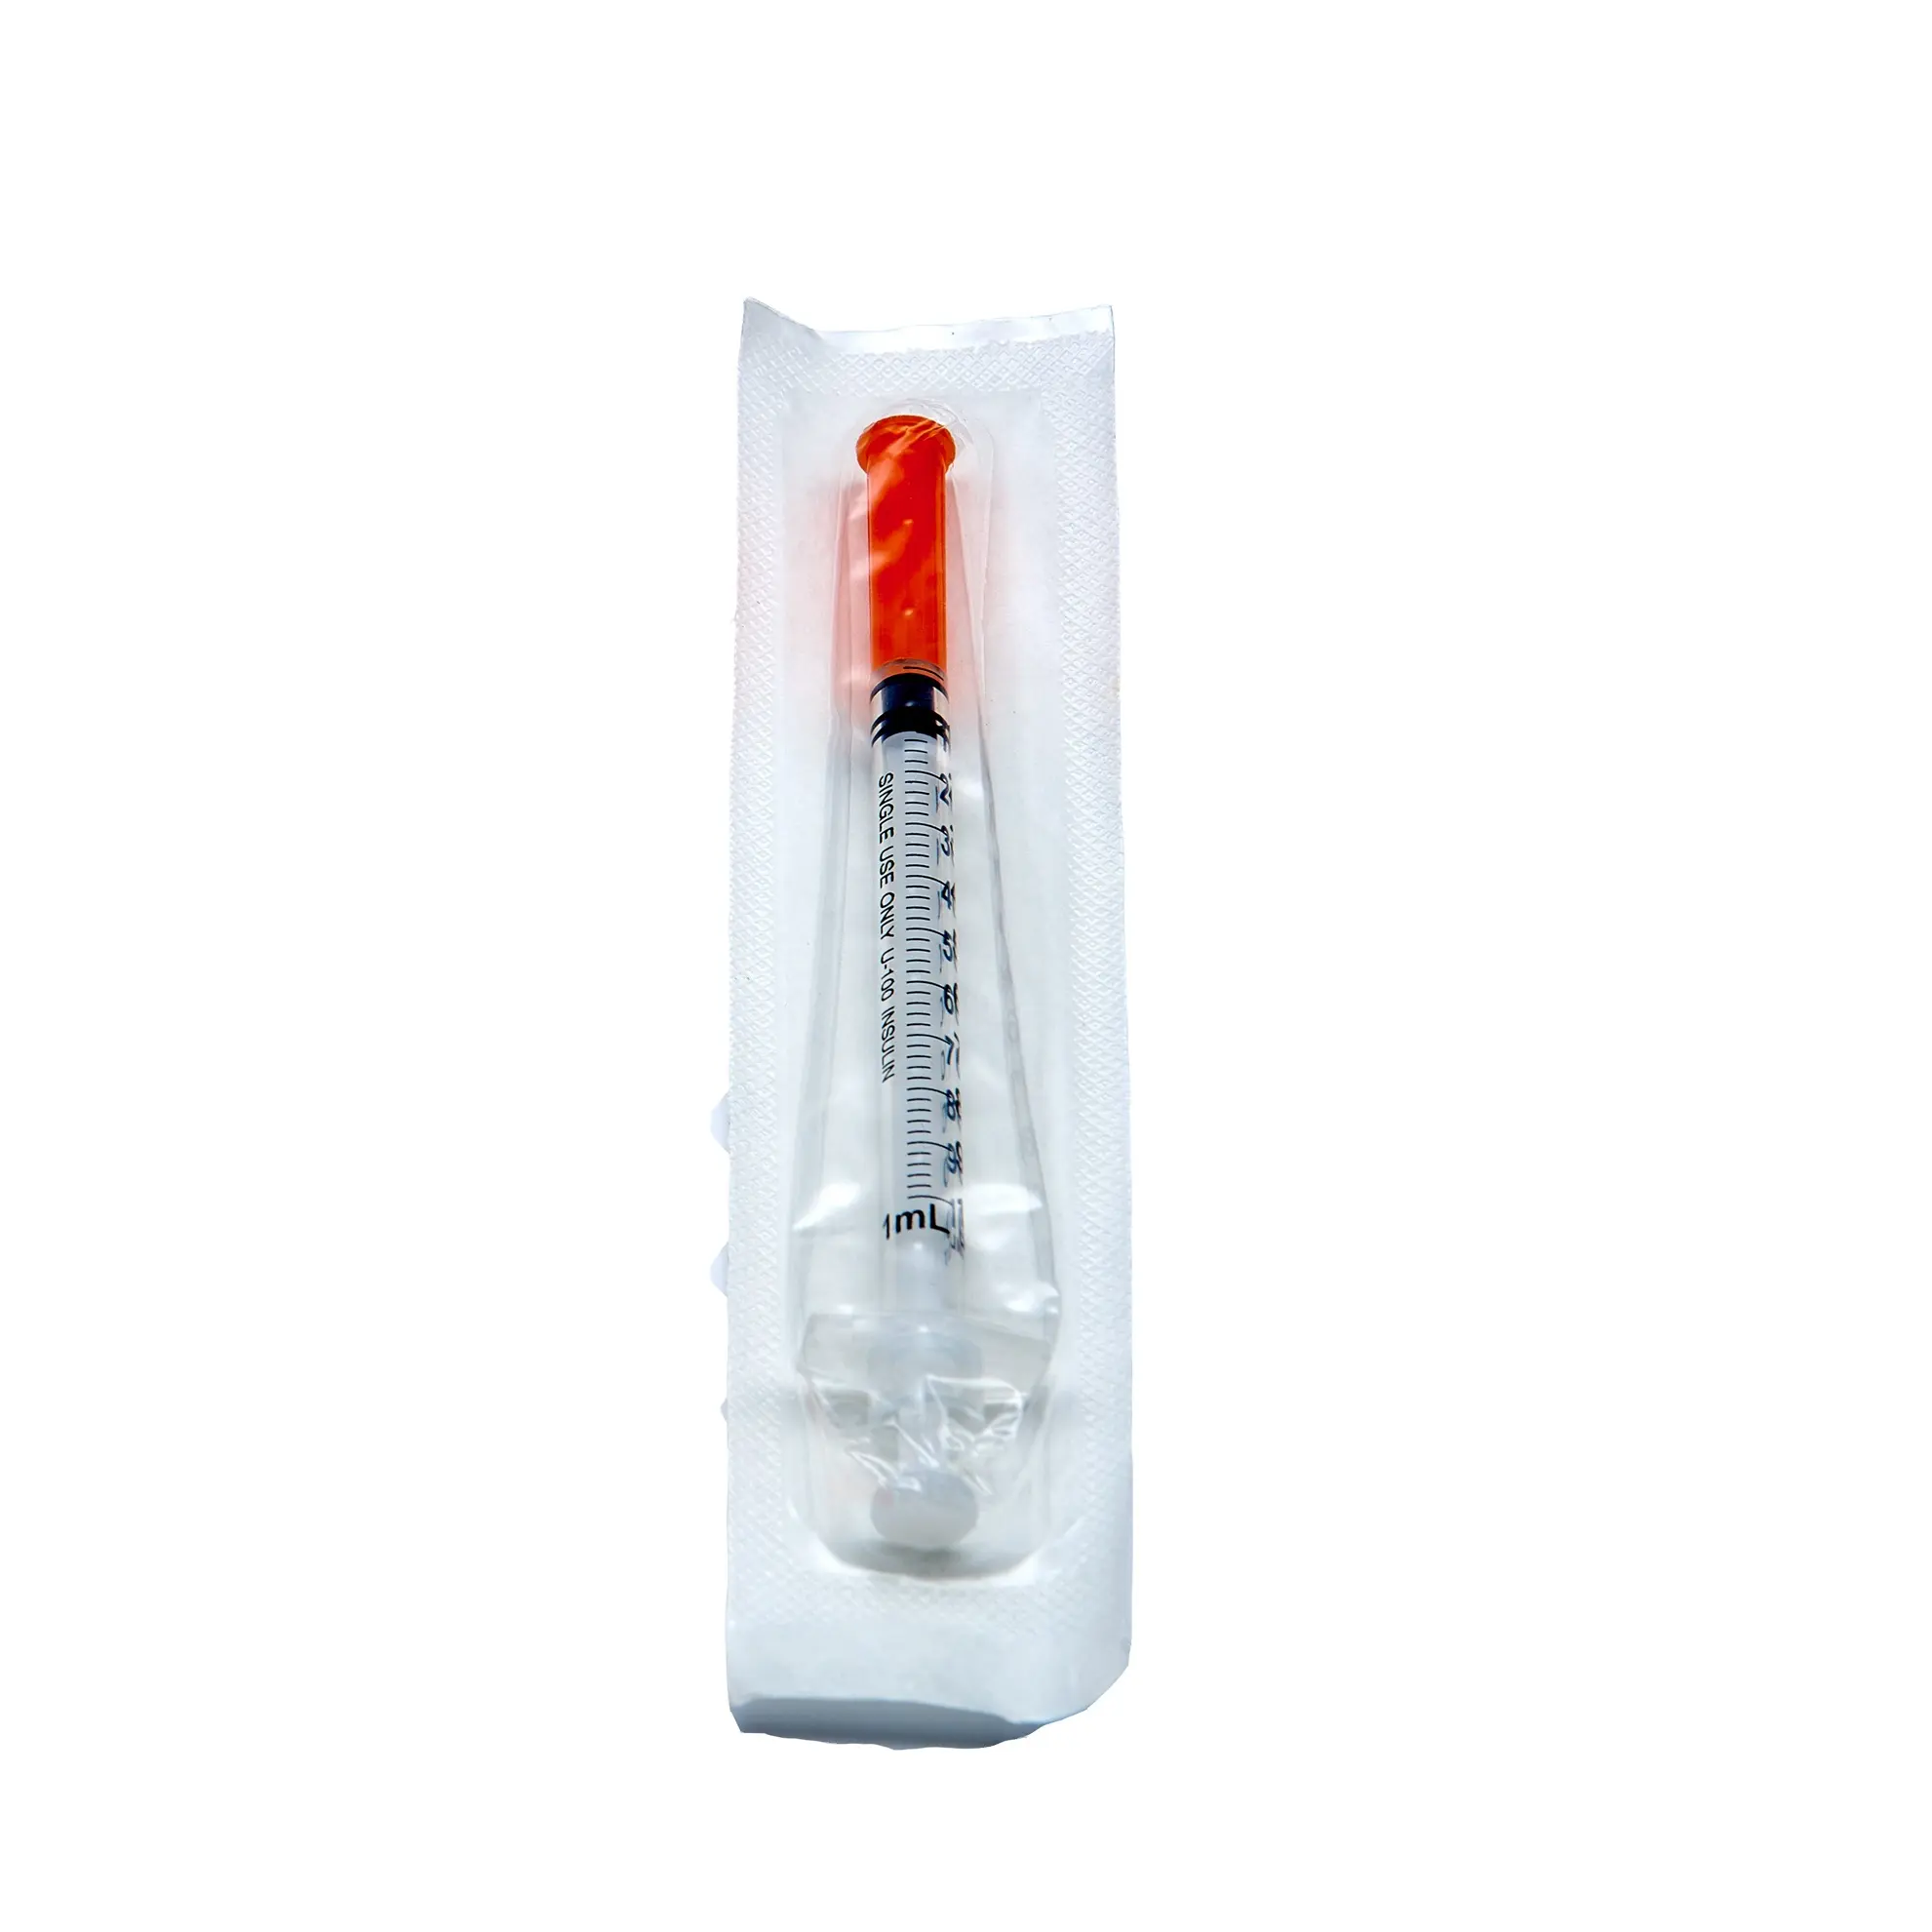 Sterile Disposable Medical Painless Insulin Syringe With Fixed Fine Needle U-40 U-100 0.3ml 0.5ml 1ml For Painless Injection